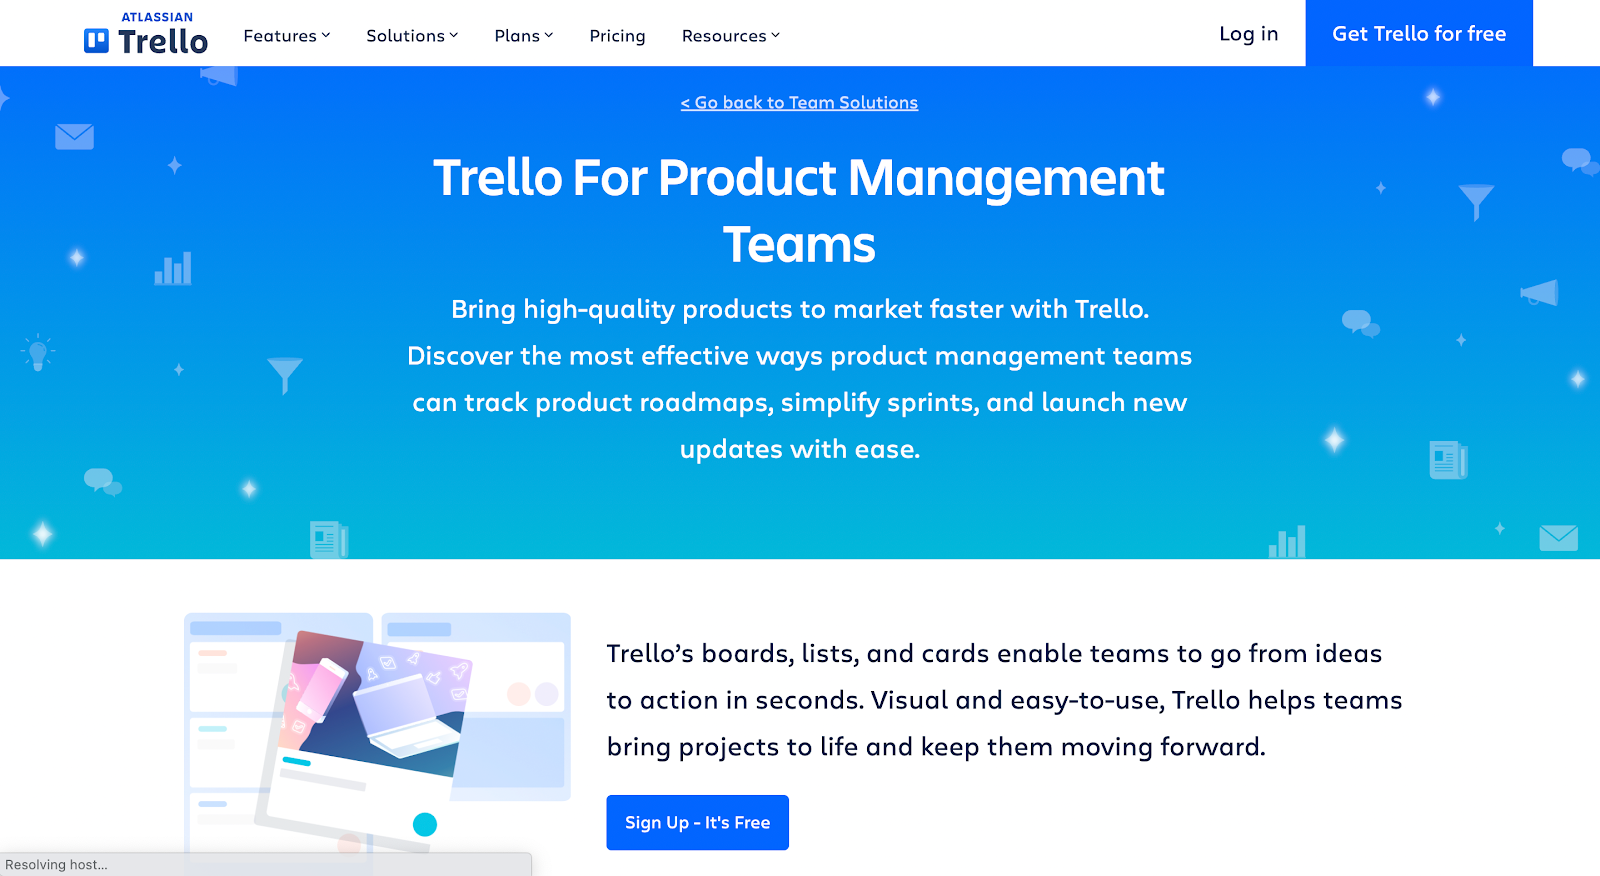 This project management tool helps teams collaborate